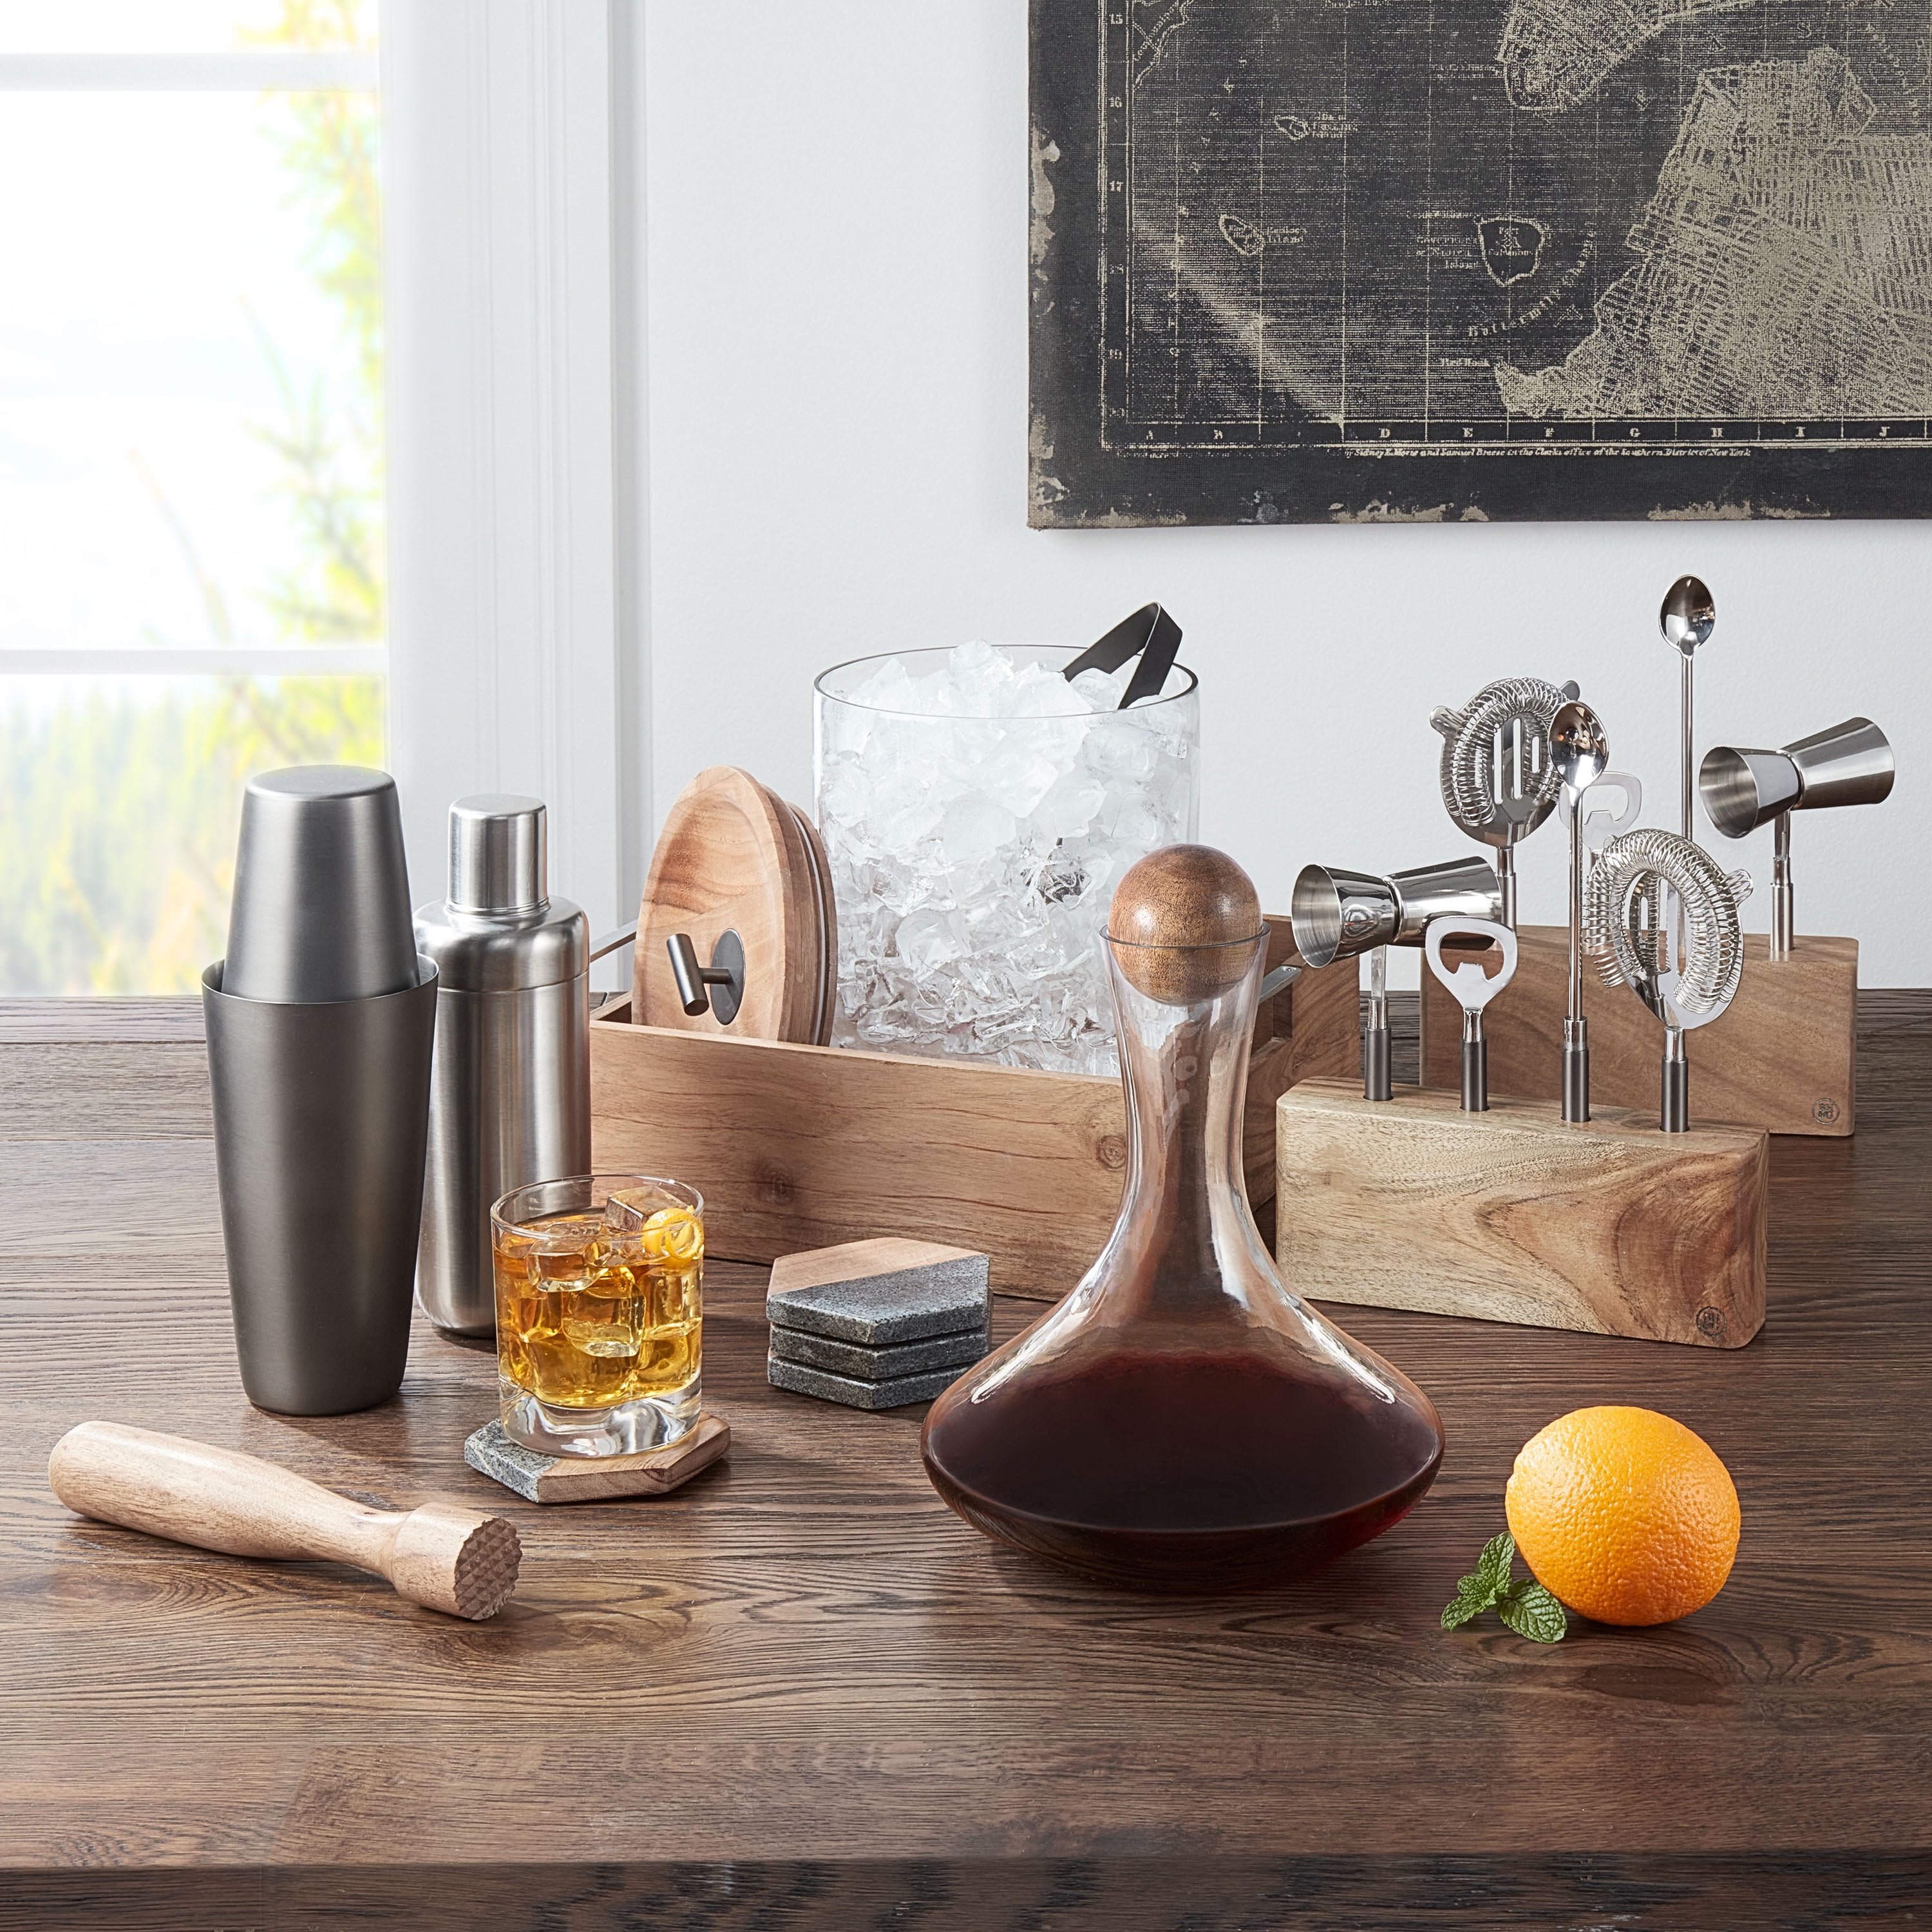 Carafe with Wood Stopper #36071